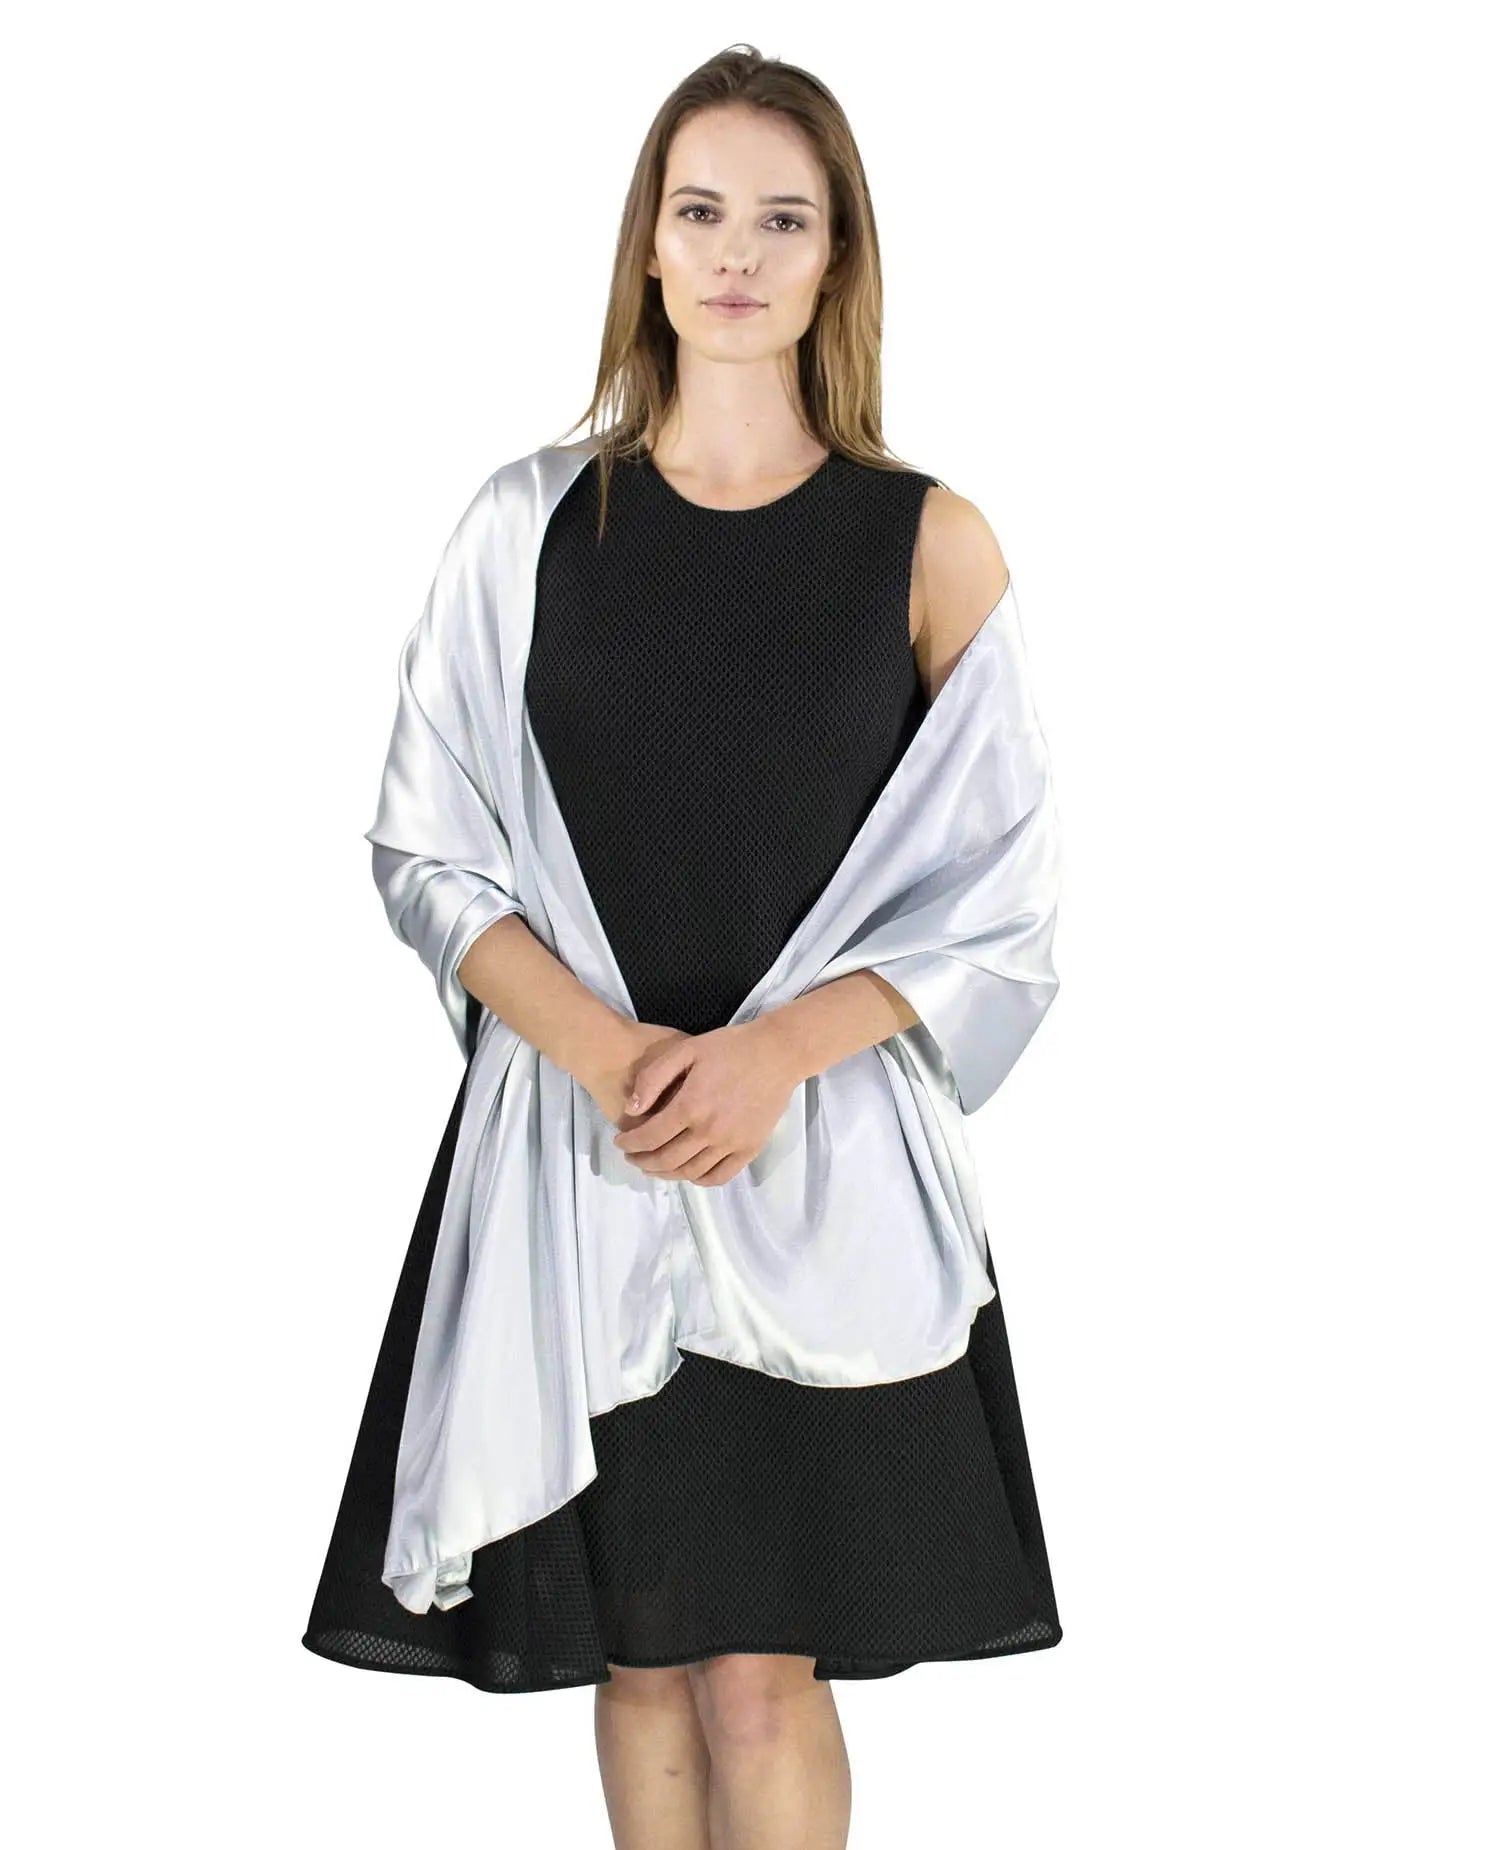 Elegant satin evening shawl on a woman in black and white dress